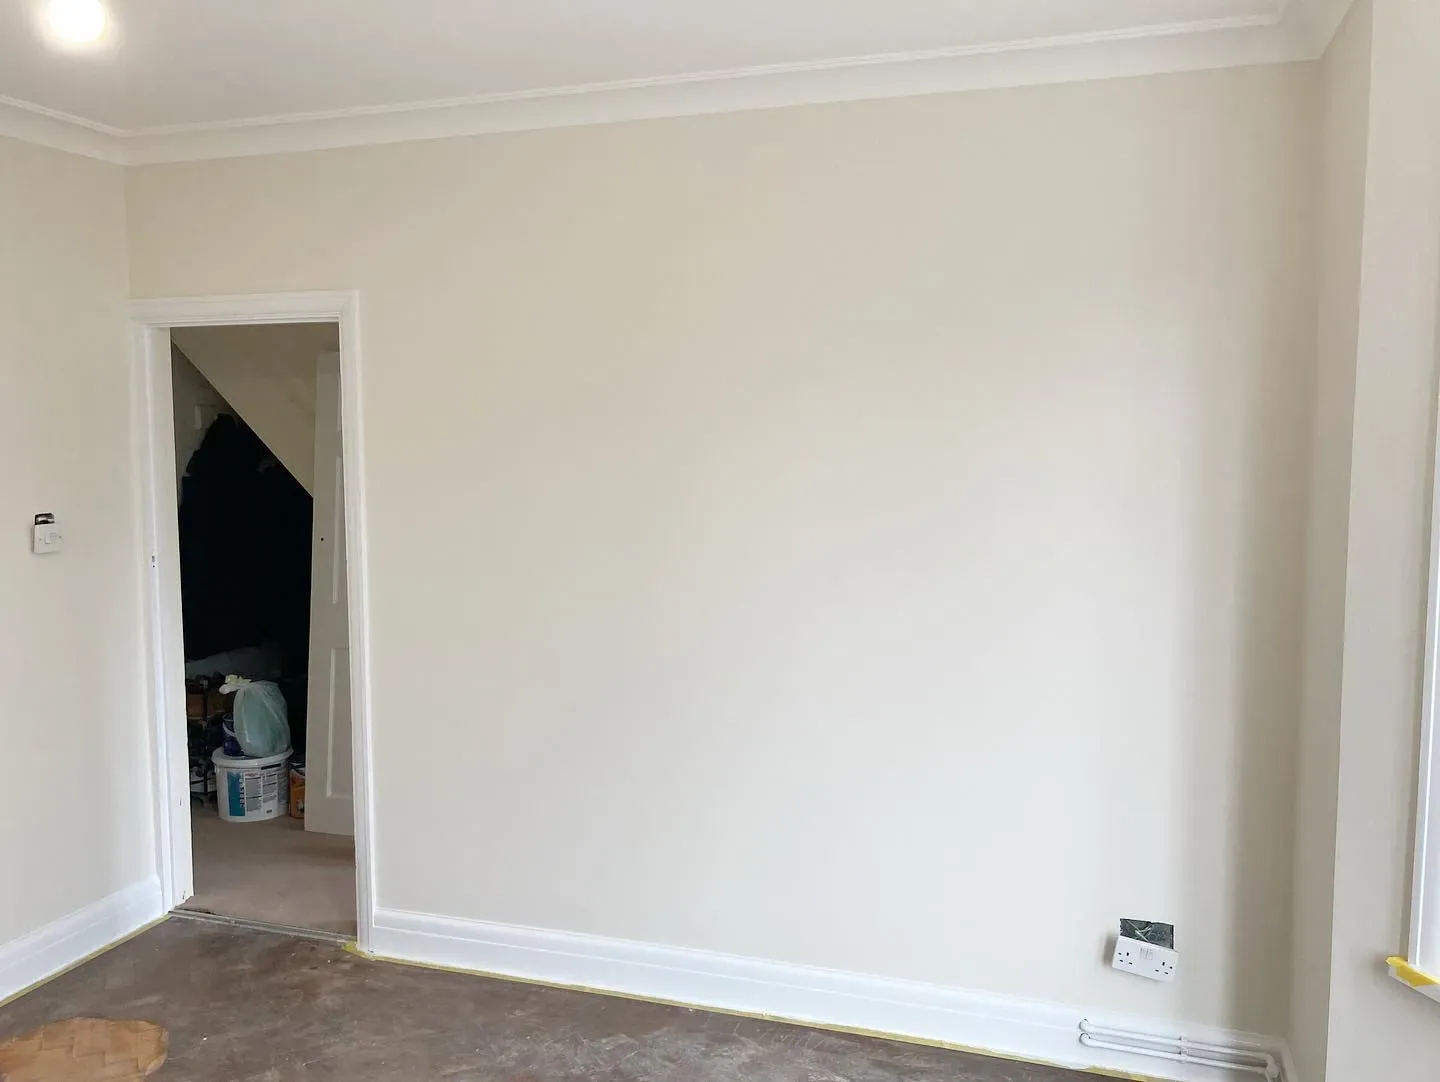 Dulux Almond White living room paint